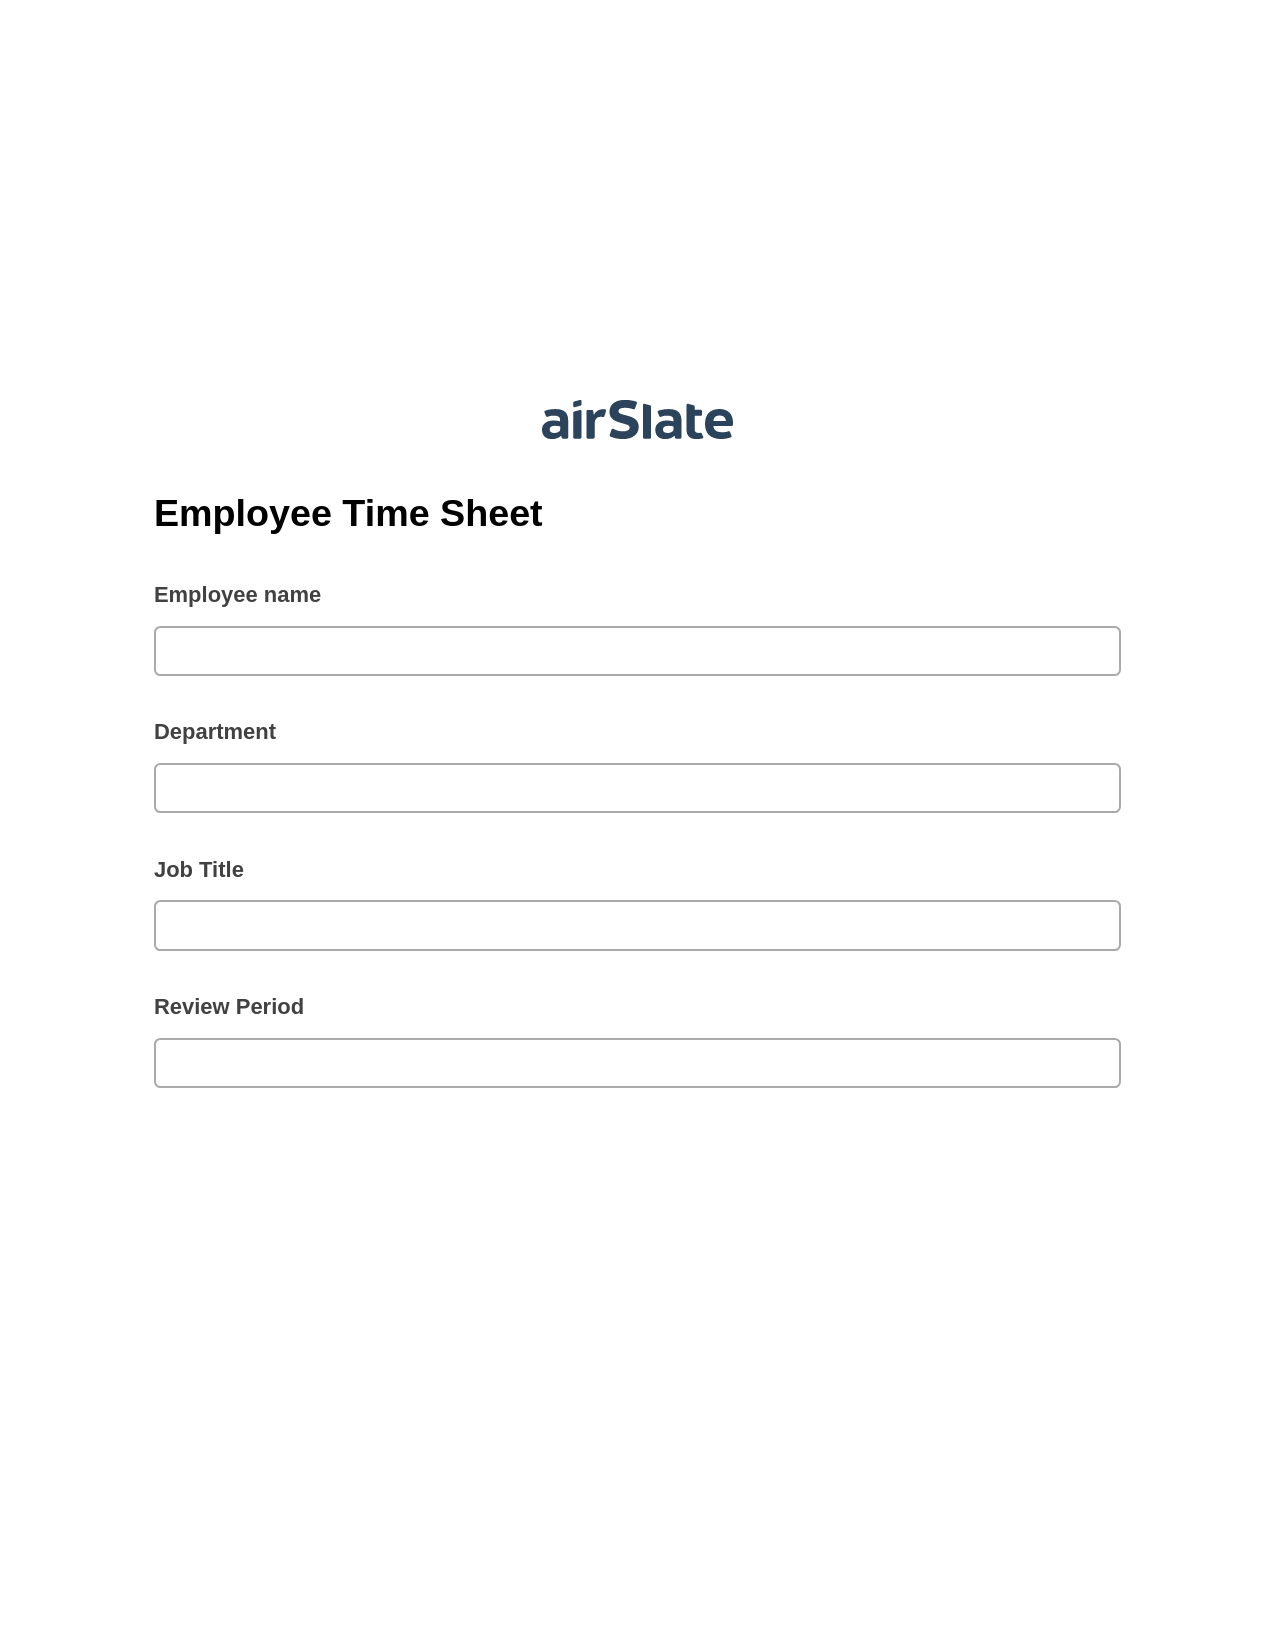 Multirole Employee Time Sheet Pre-fill Dropdowns from Airtable, Create Salesforce Records Bot, Export to Smartsheet